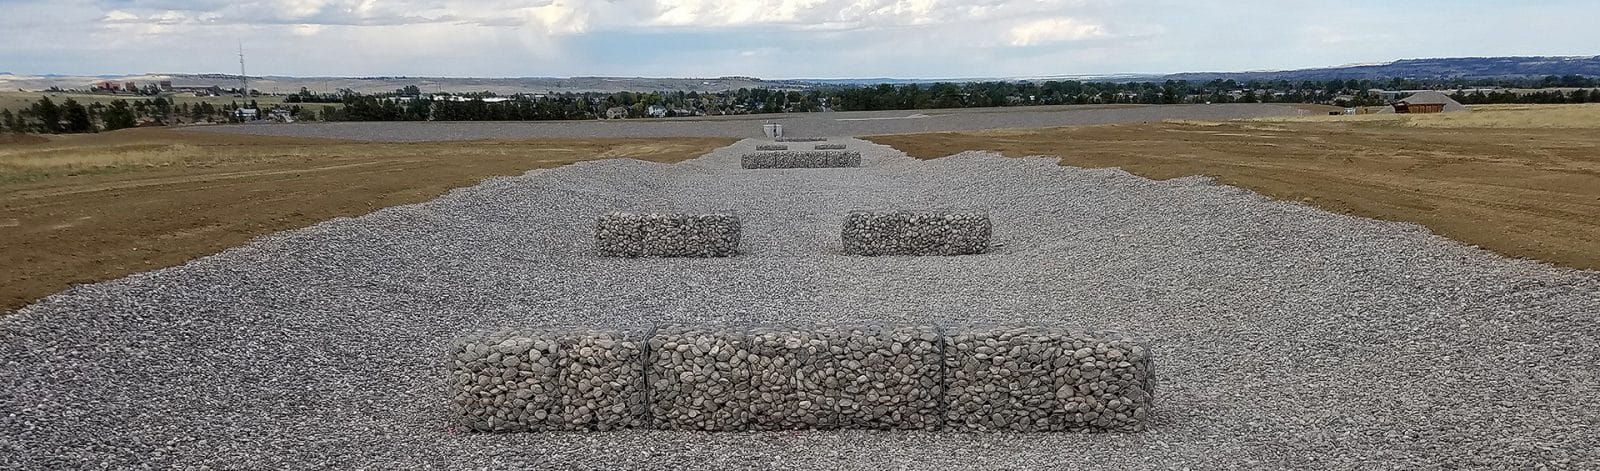 Billings Airport Storm Drainage System